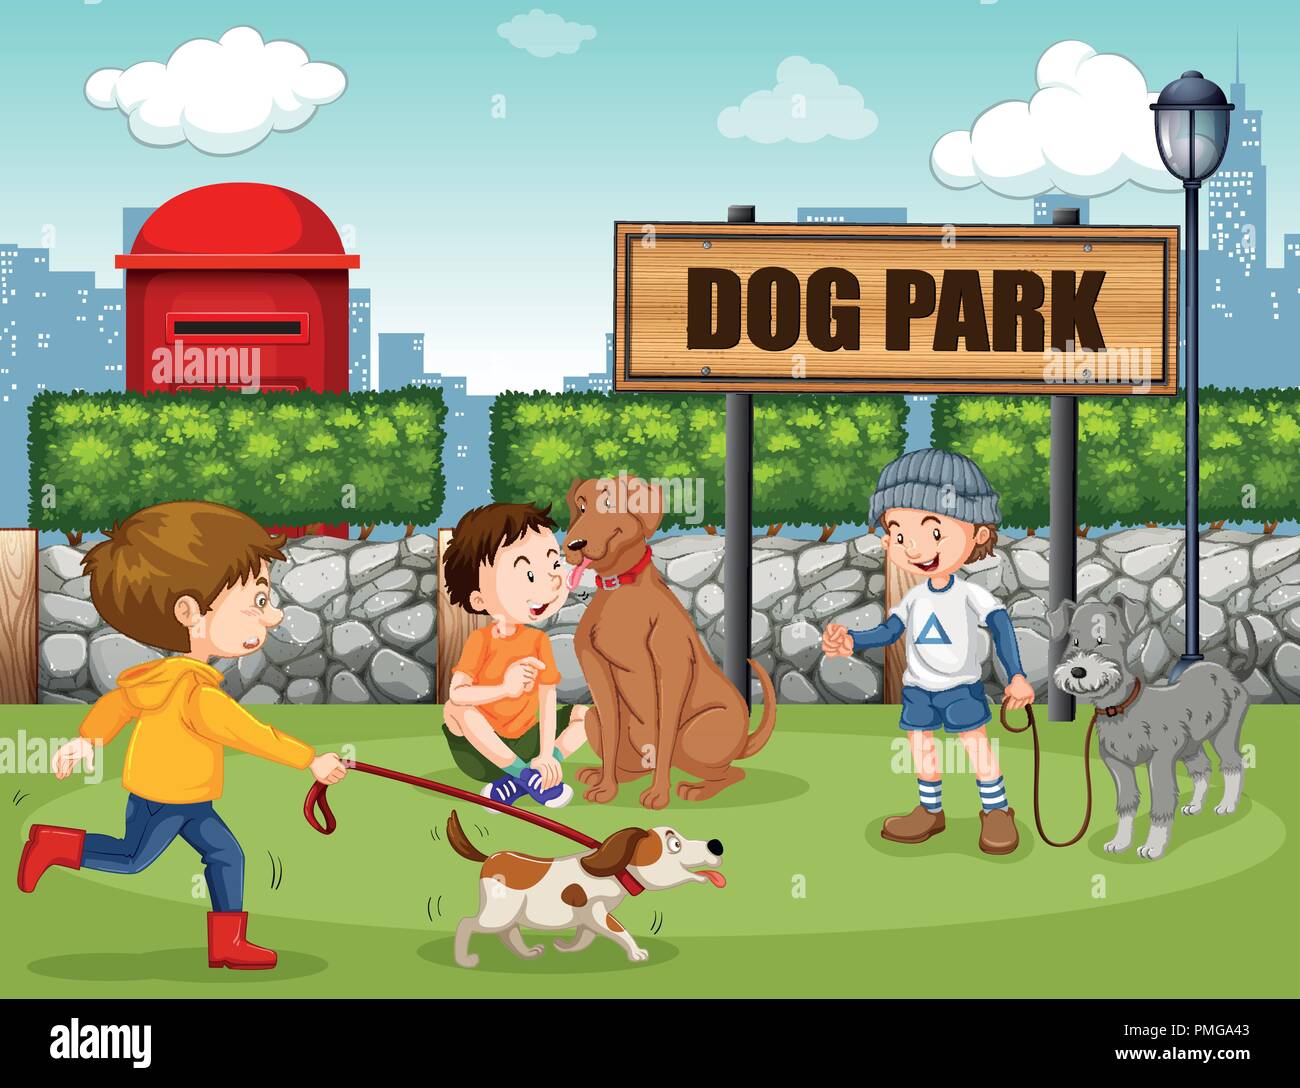 People in dog park illustration Stock Vector